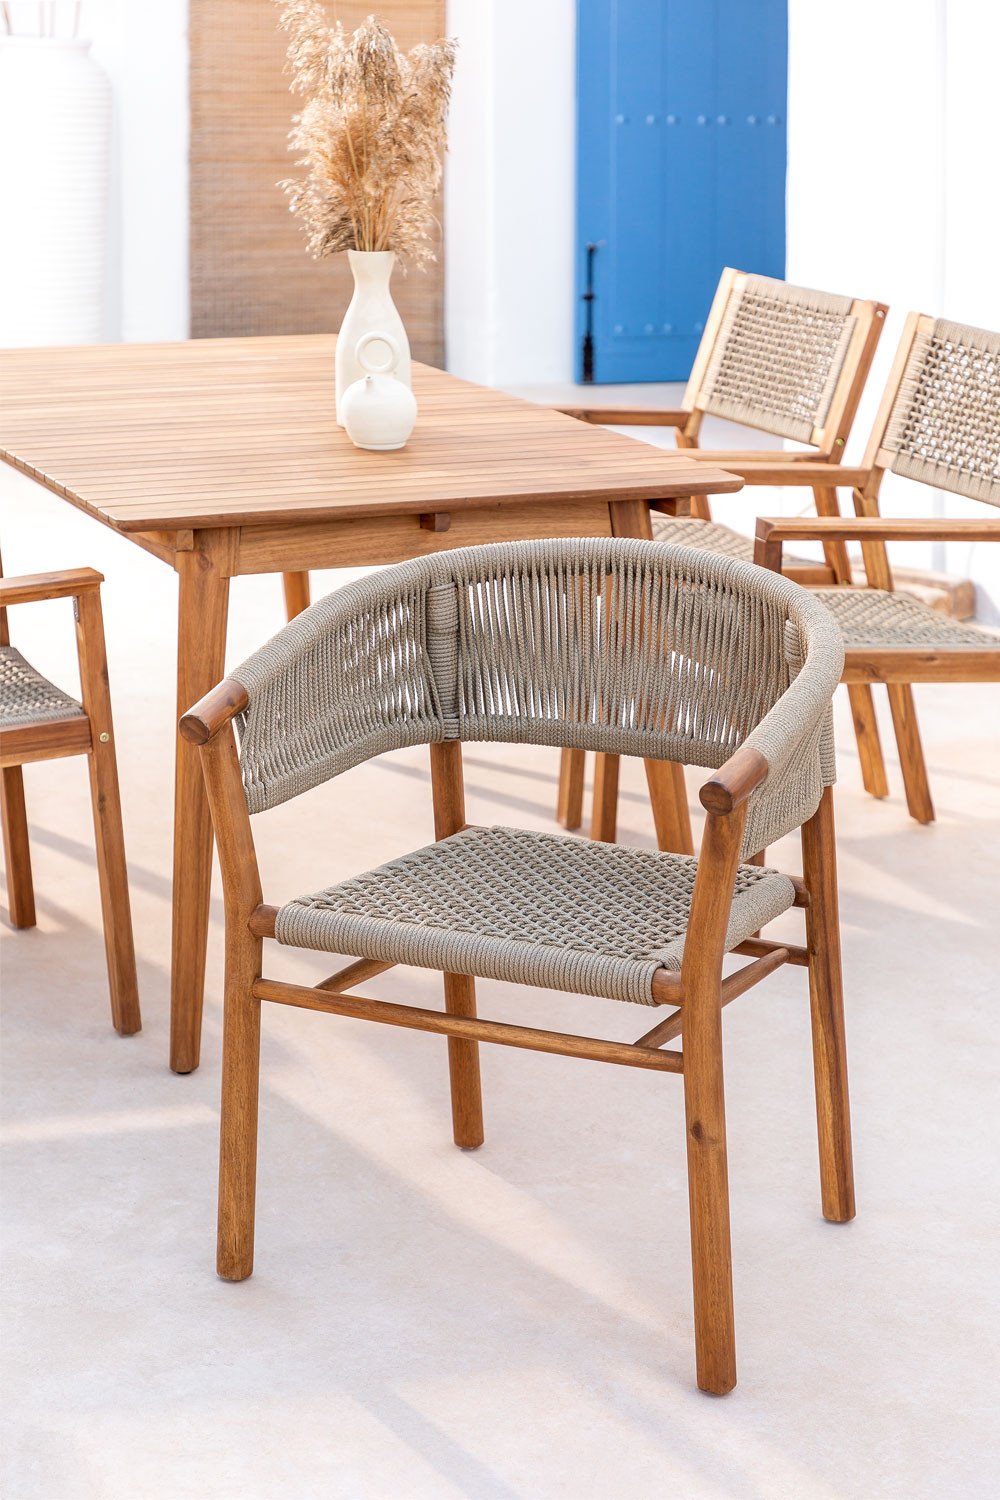 Tenay Supreme pack of 4 wooden garden chairs with armrests , gallery image 1